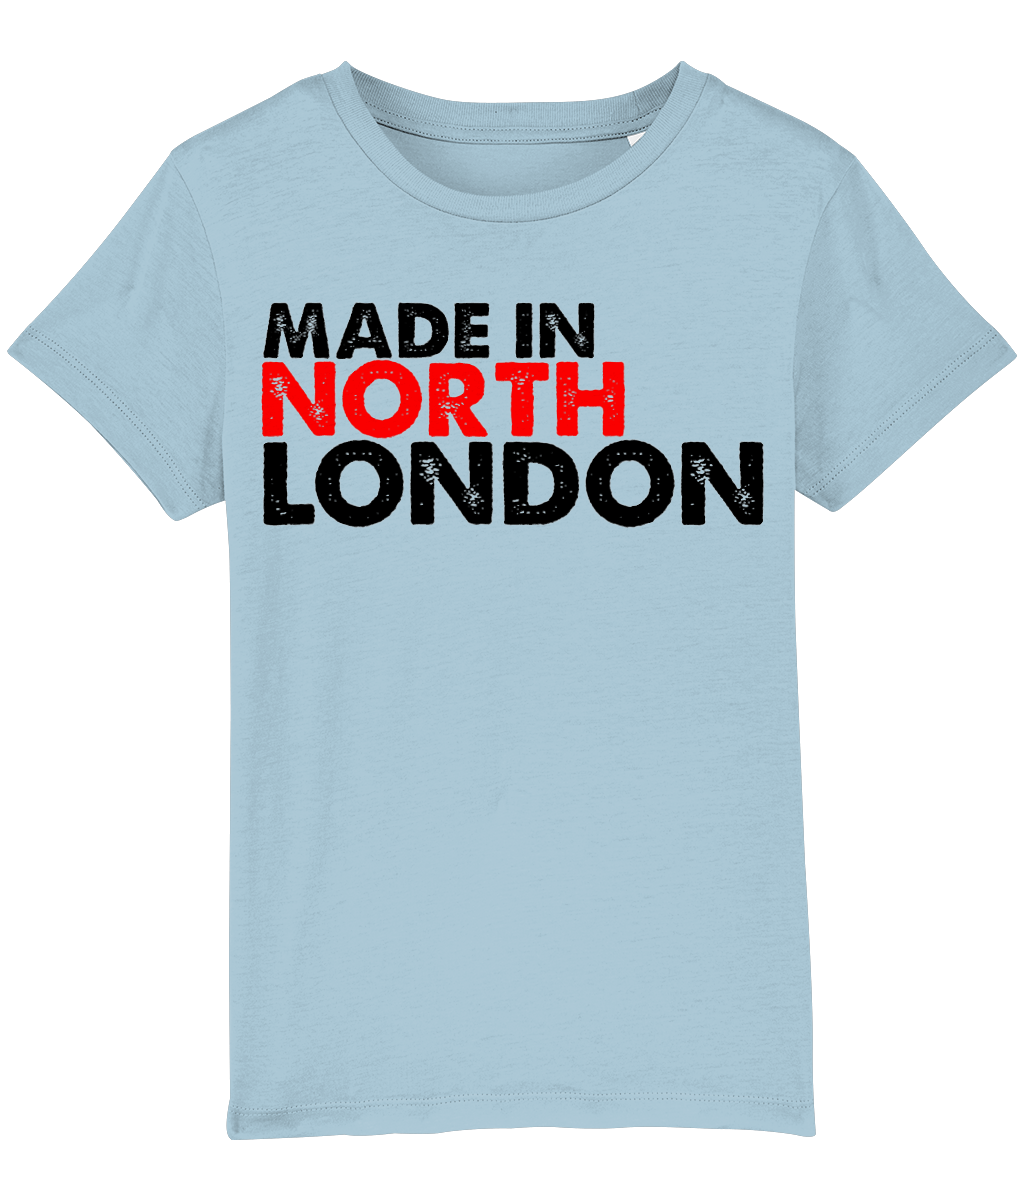 Made in North London Kids T-Shirt